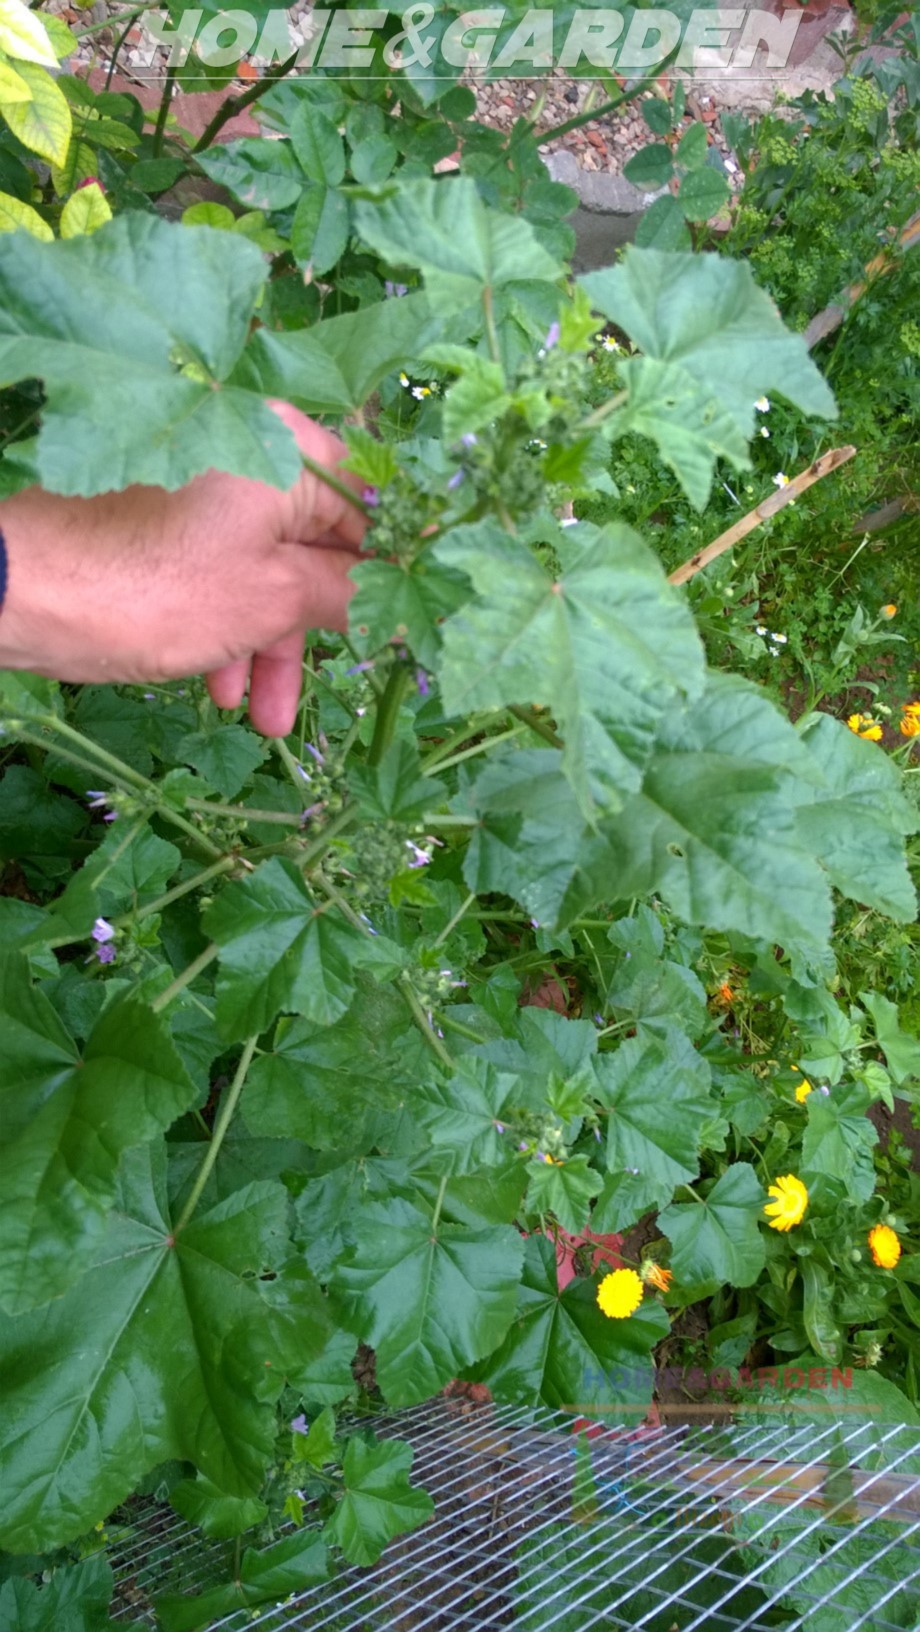 All parts of the mallow plant are safe to use and edible, the plant have been used as a food source for many years. The leaves and flowers can be eaten, and a tea can be made from the leaves, the flowers and the roots.